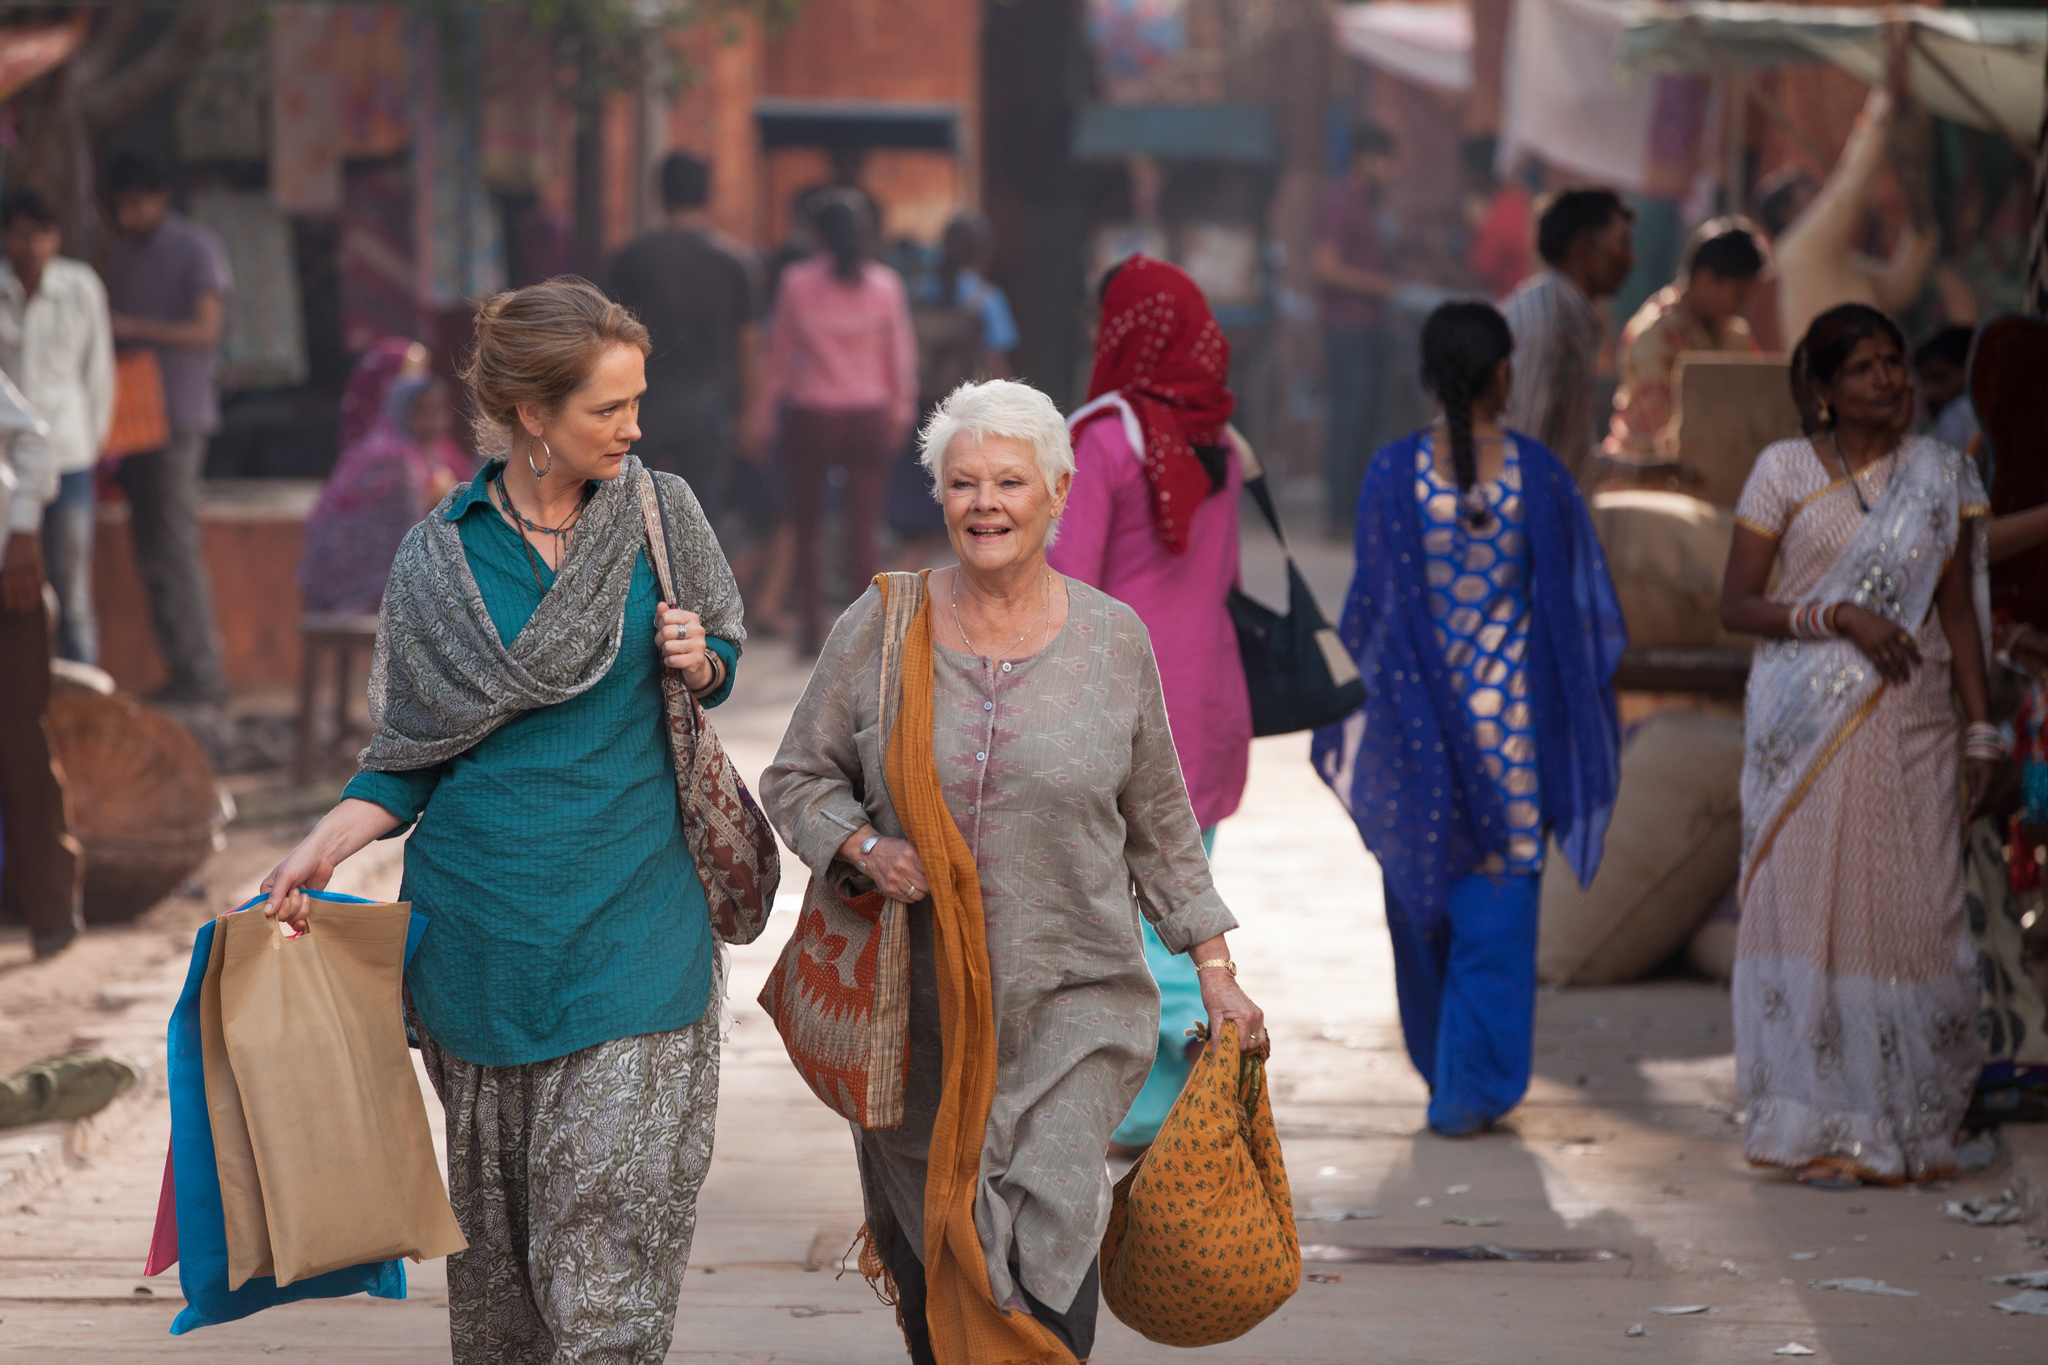 The Second Best Exotic Marigold Hotel HD Wallpaper